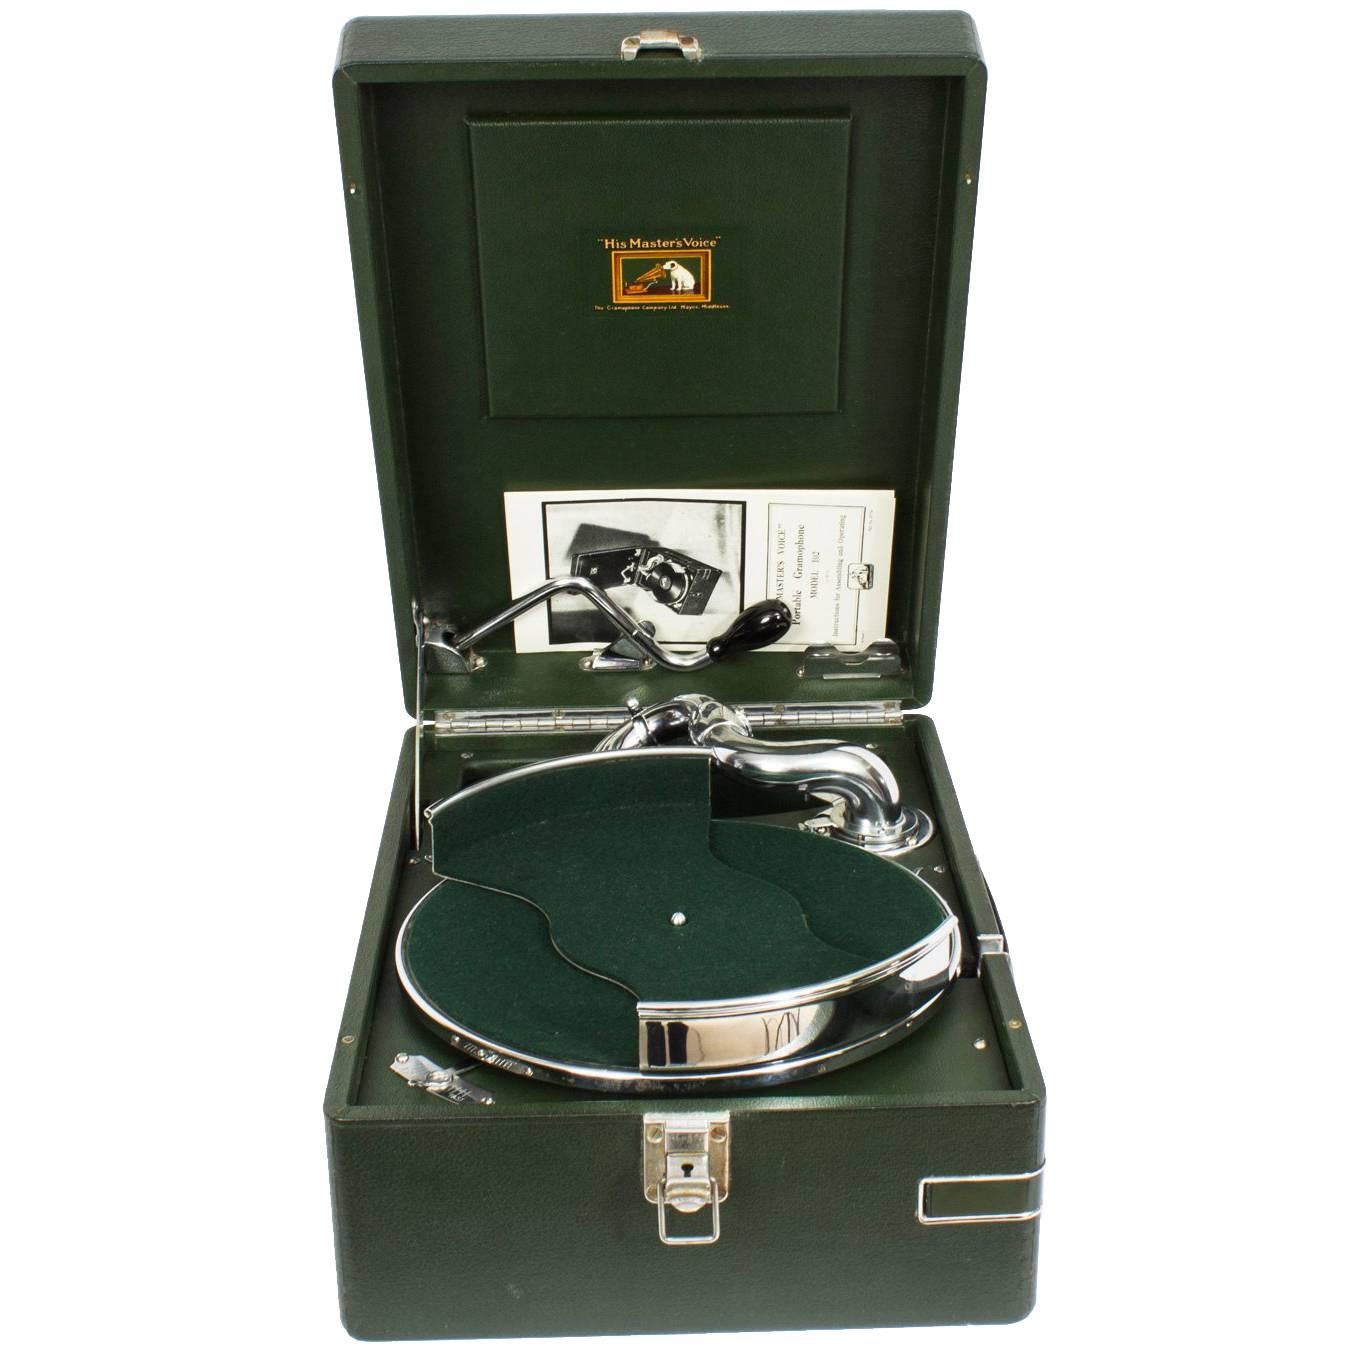 Antique Portable HMV Gramophone Mod 102 Green with Disc Carrier, 1934